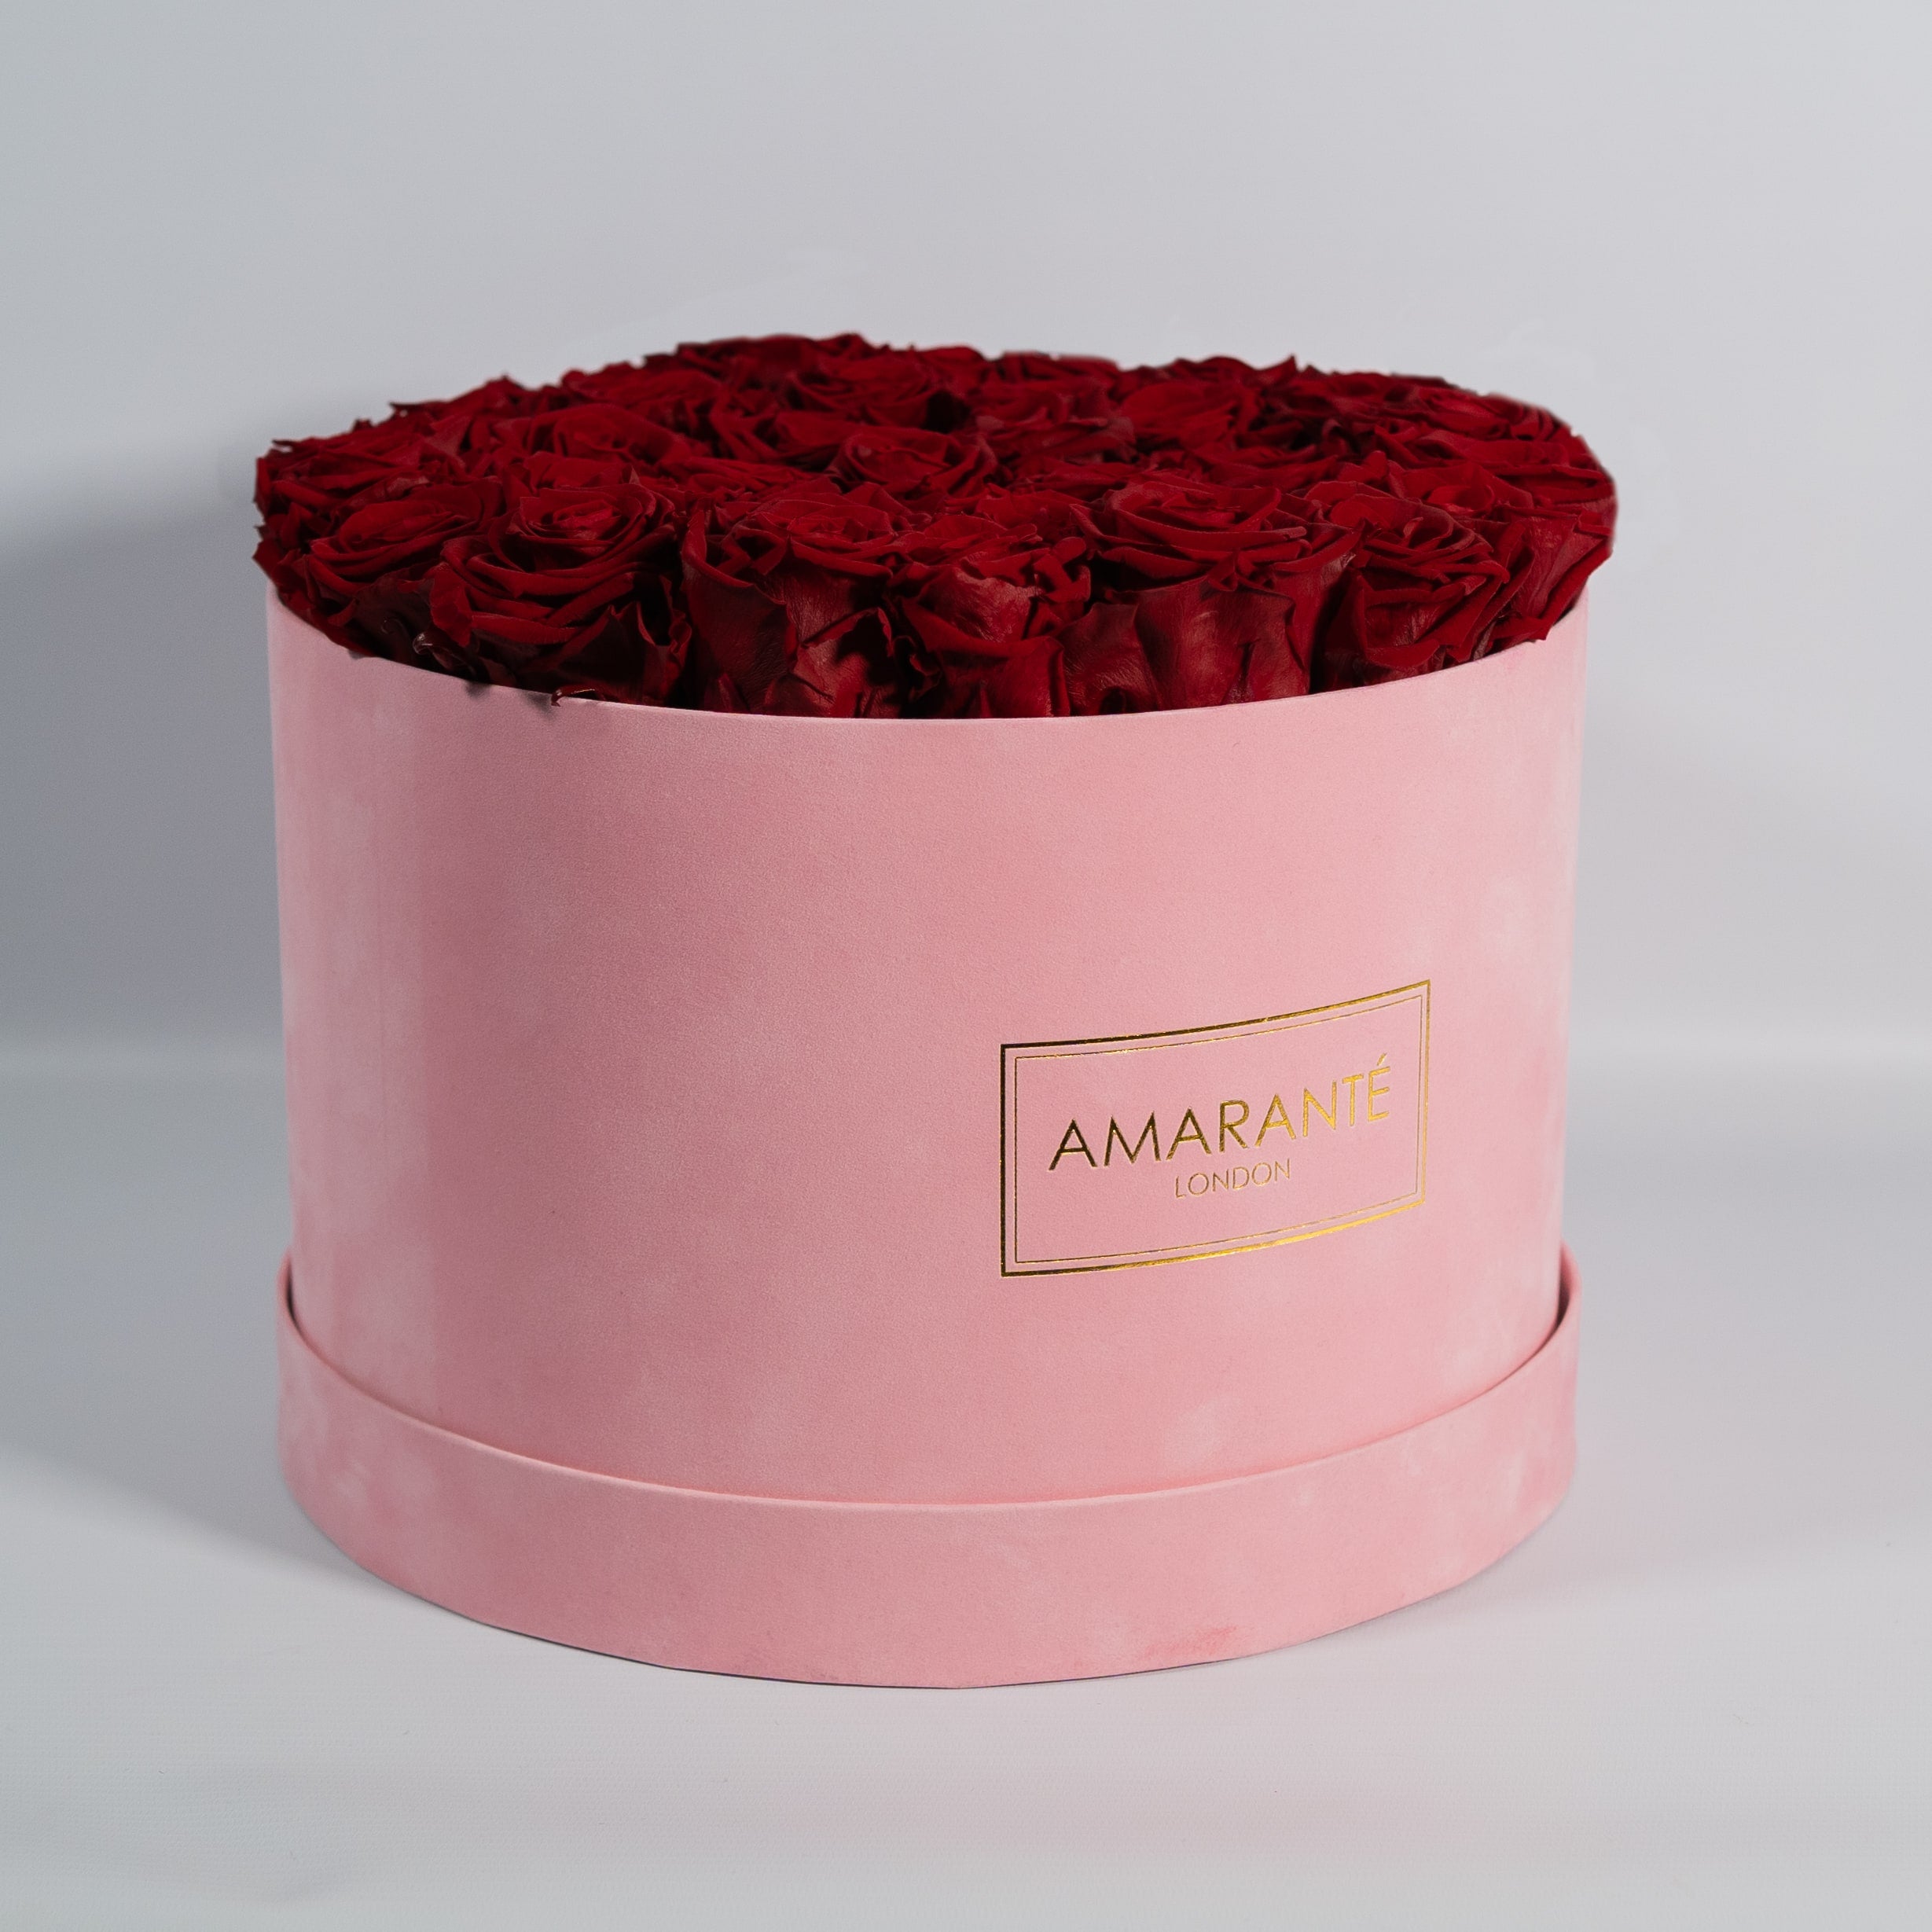 Charming wine red Roses denoting love and religious fervour